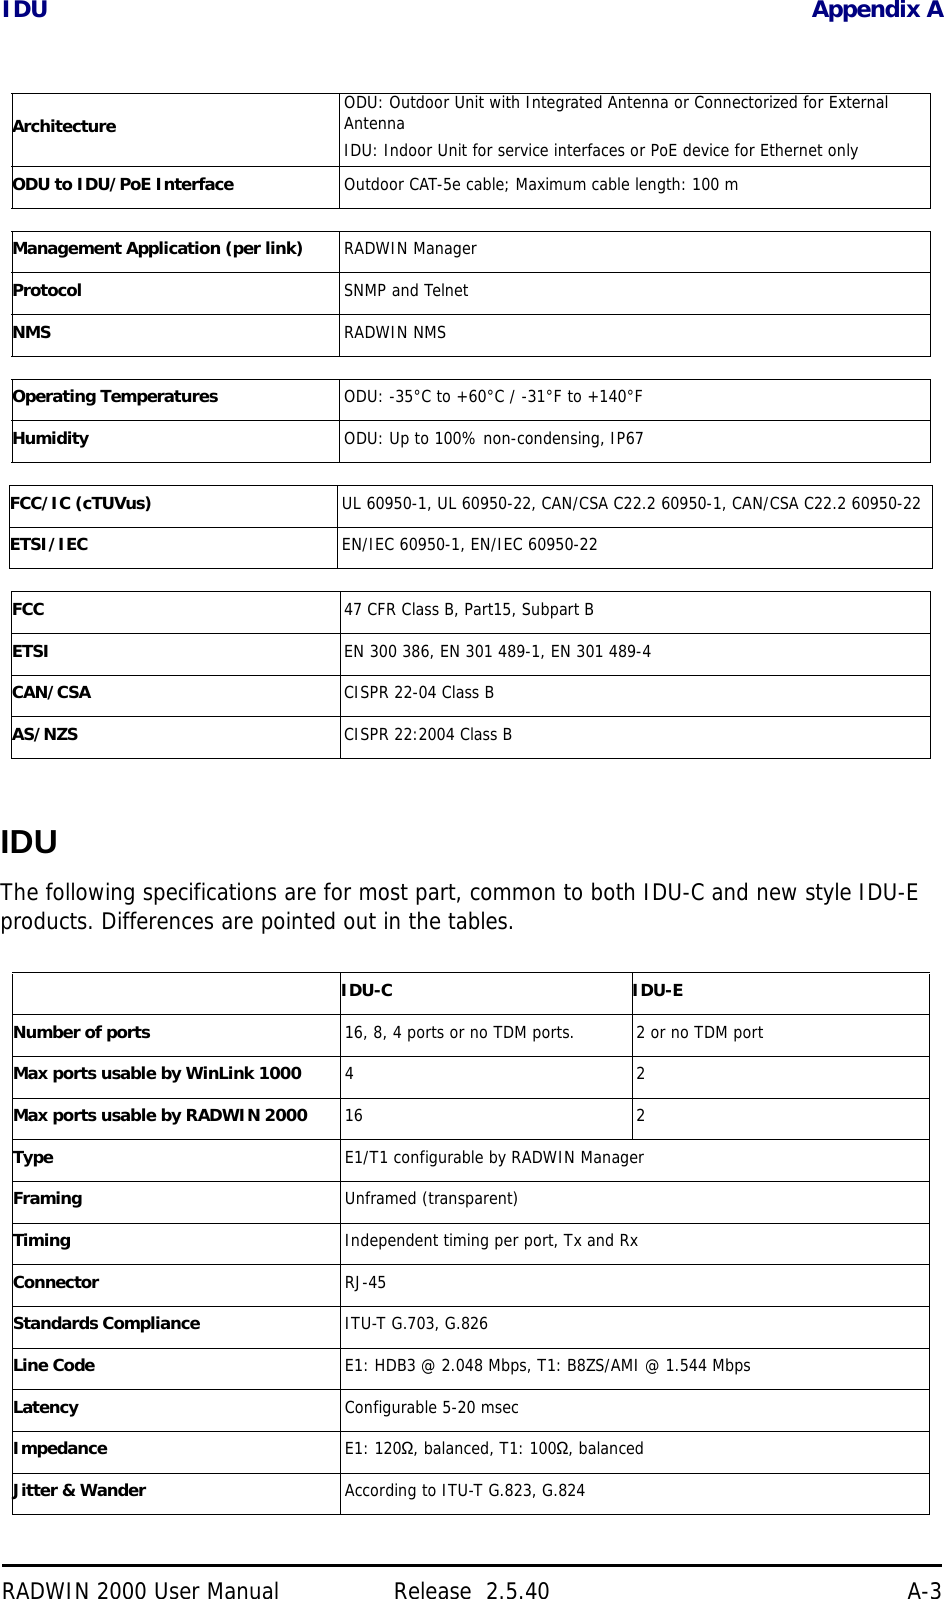 IDU Appendix ARADWIN 2000 User Manual Release  2.5.40 A-3IDUThe following specifications are for most part, common to both IDU-C and new style IDU-E products. Differences are pointed out in the tables.Architecture ODU: Outdoor Unit with Integrated Antenna or Connectorized for External AntennaIDU: Indoor Unit for service interfaces or PoE device for Ethernet onlyODU to IDU/PoE Interface Outdoor CAT-5e cable; Maximum cable length: 100 mManagement Application (per link) RADWIN ManagerProtocol SNMP and TelnetNMS RADWIN NMSOperating Temperatures ODU: -35°C to +60°C / -31°F to +140°FHumidity ODU: Up to 100% non-condensing, IP67FCC/IC (cTUVus) UL 60950-1, UL 60950-22, CAN/CSA C22.2 60950-1, CAN/CSA C22.2 60950-22ETSI/IEC EN/IEC 60950-1, EN/IEC 60950-22FCC 47 CFR Class B, Part15, Subpart BETSI EN 300 386, EN 301 489-1, EN 301 489-4CAN/CSA CISPR 22-04 Class BAS/NZS CISPR 22:2004 Class BIDU-C IDU-ENumber of ports 16, 8, 4 ports or no TDM ports. 2 or no TDM portMax ports usable by WinLink 1000 42Max ports usable by RADWIN 2000 16 2Type E1/T1 configurable by RADWIN ManagerFraming Unframed (transparent)Timing Independent timing per port, Tx and Rx Connector RJ-45Standards Compliance ITU-T G.703, G.826Line Code E1: HDB3 @ 2.048 Mbps, T1: B8ZS/AMI @ 1.544 MbpsLatency Configurable 5-20 msec Impedance E1: 120Ω, balanced, T1: 100Ω, balancedJitter &amp; Wander According to ITU-T G.823, G.824